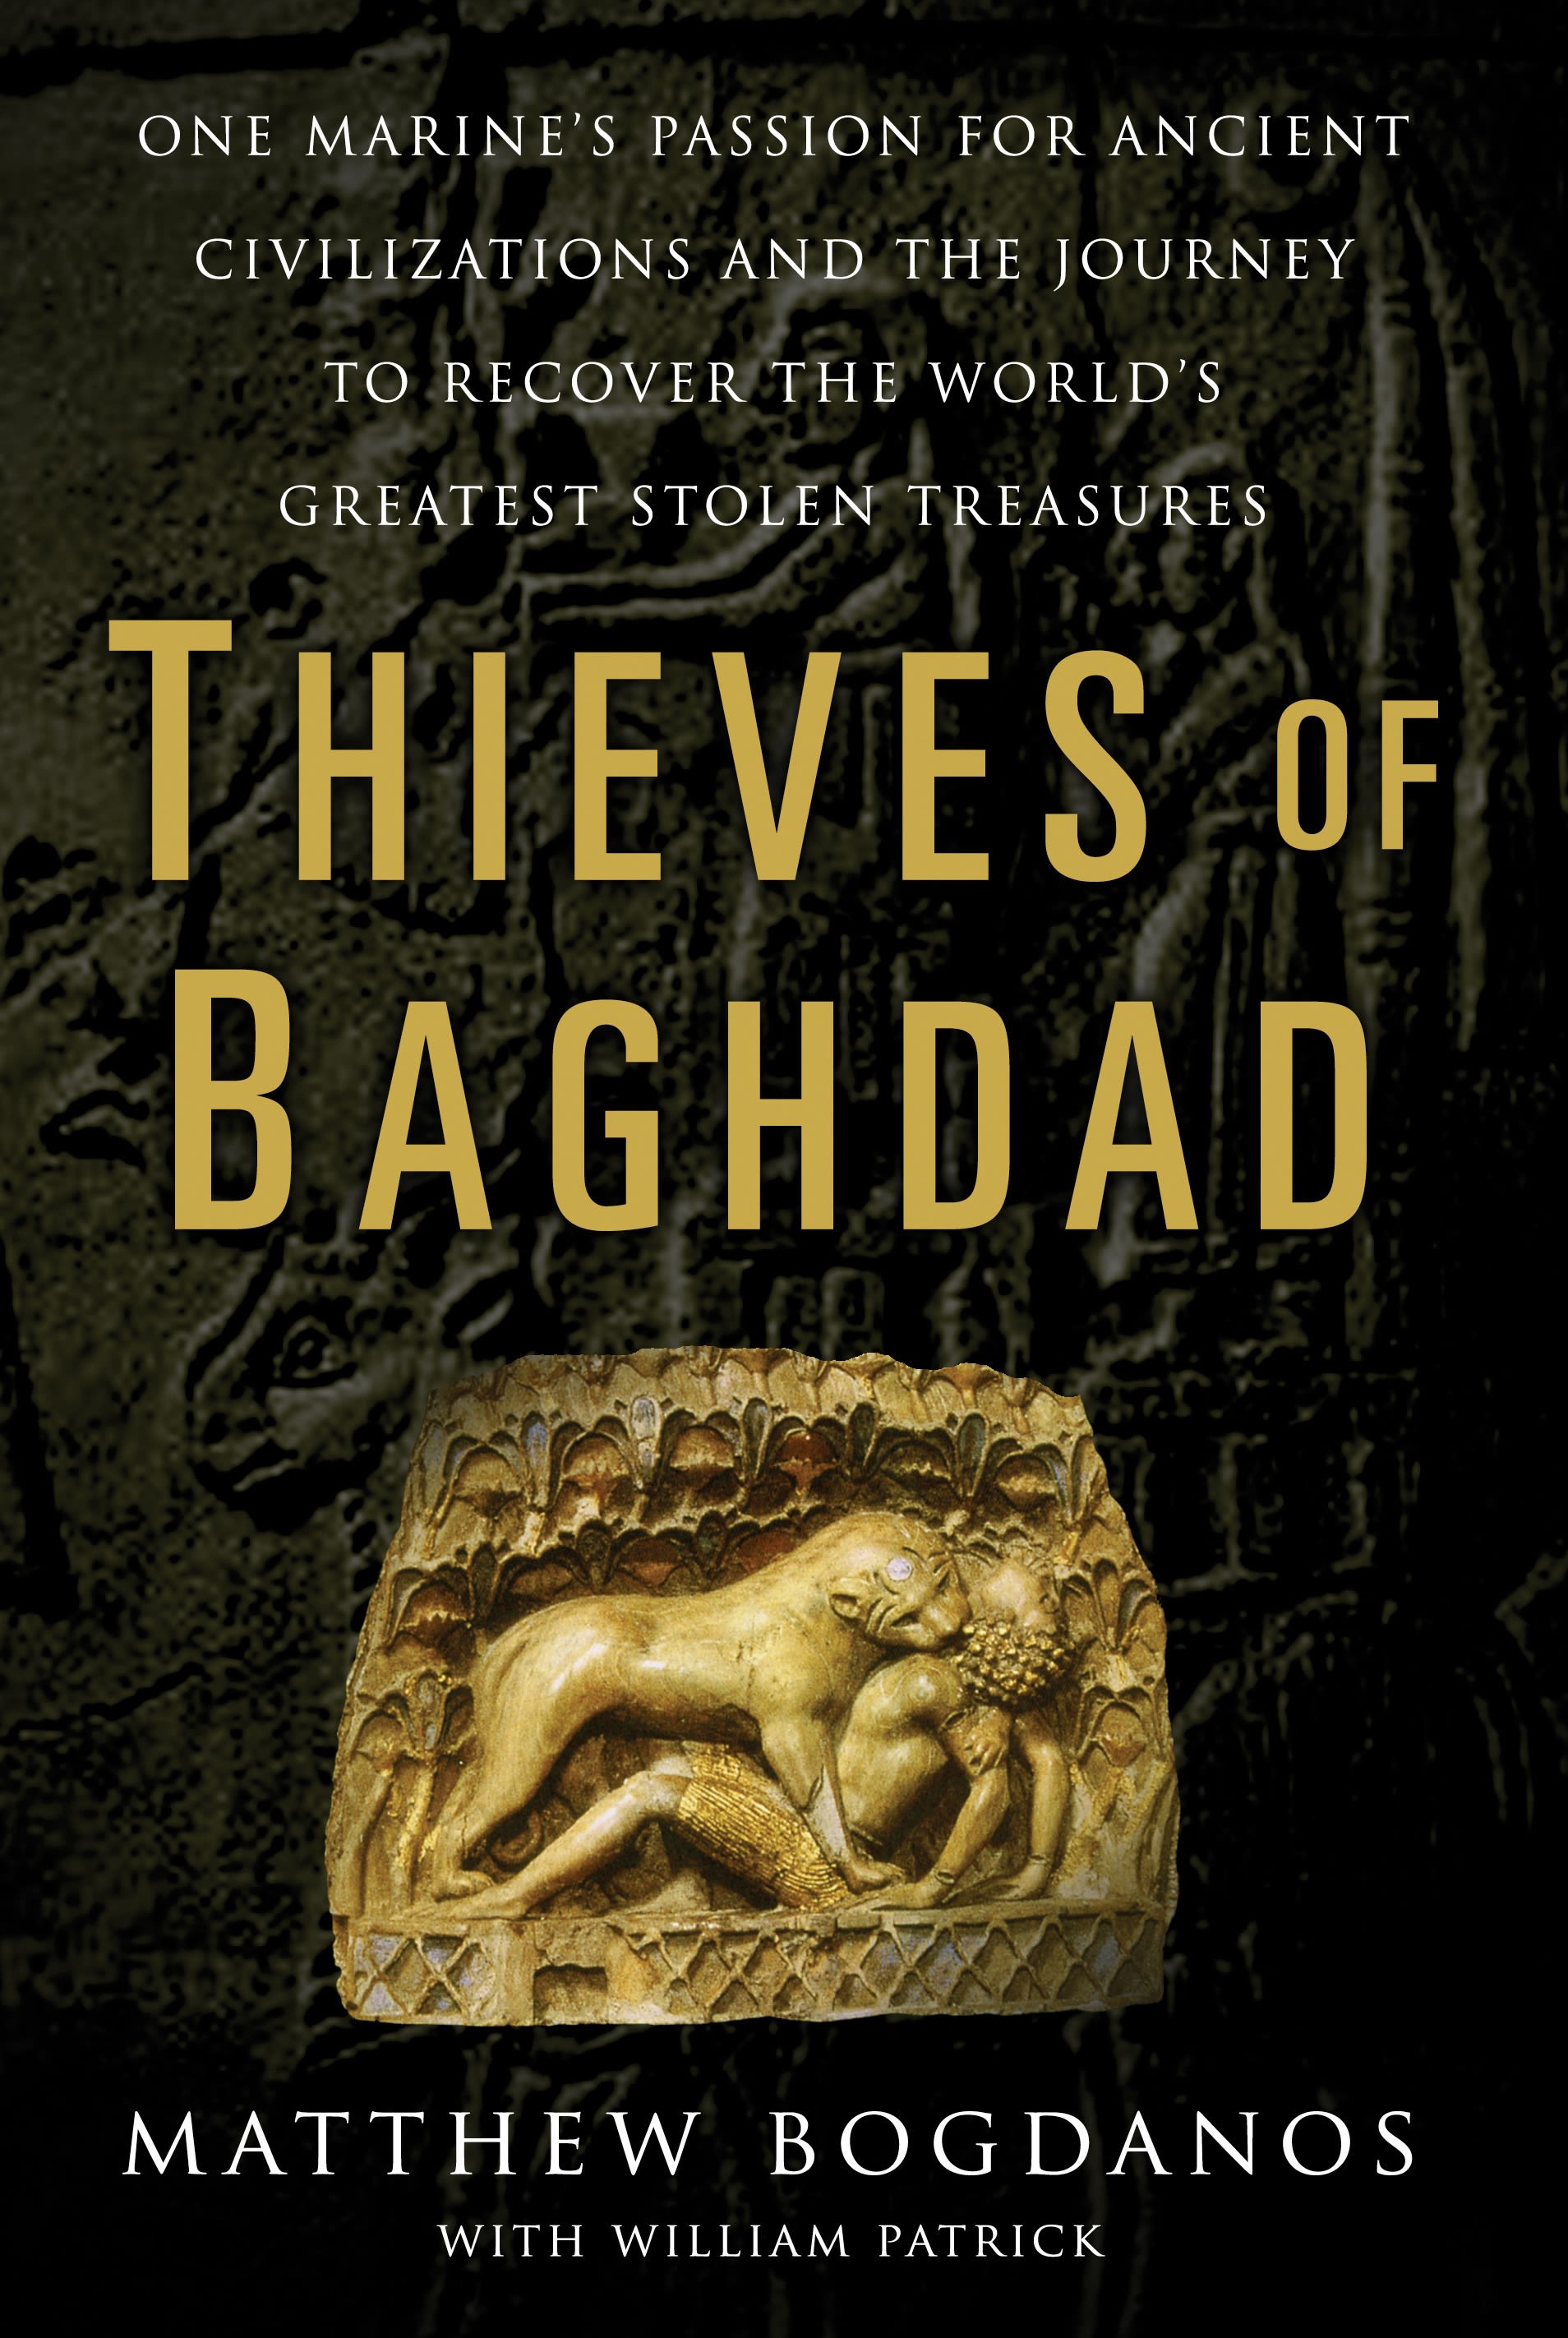 Image de couverture de Thieves of Baghdad [electronic resource] : One Marine's Passion to Recover the World's Greatest Stolen Treasures